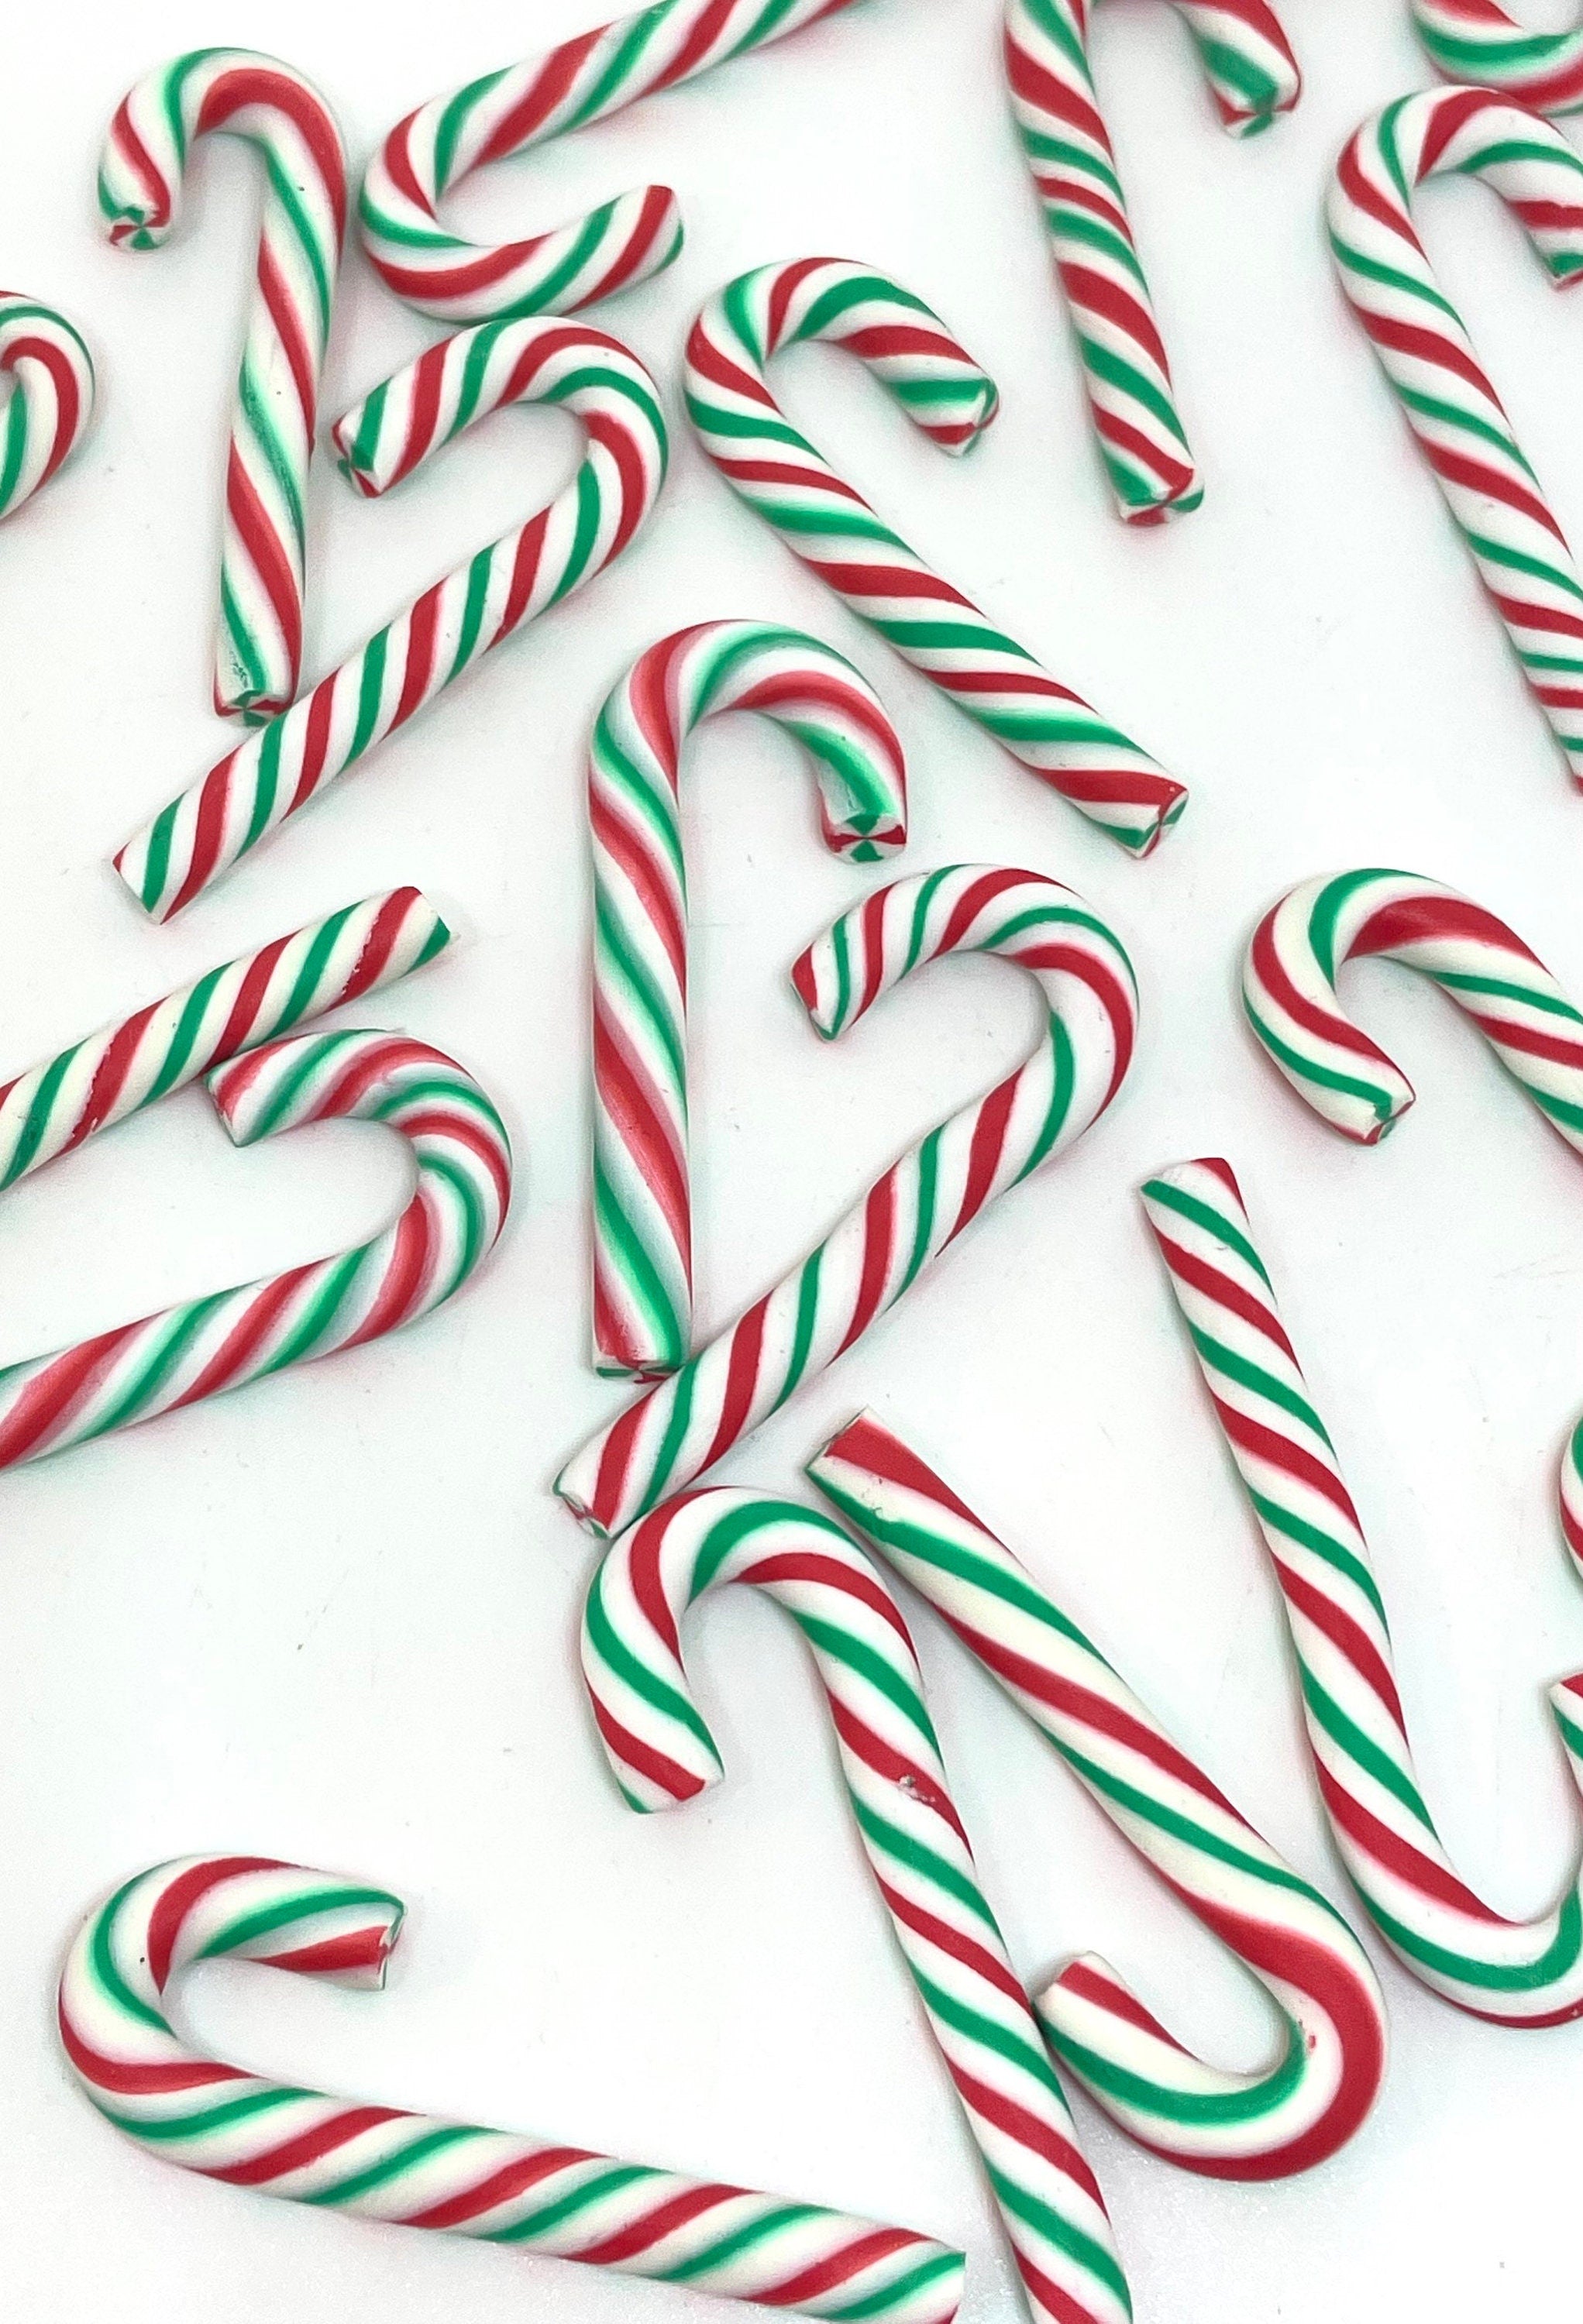 Cute Fake Candy Cane Christmas Decorations for Ornaments, Slime